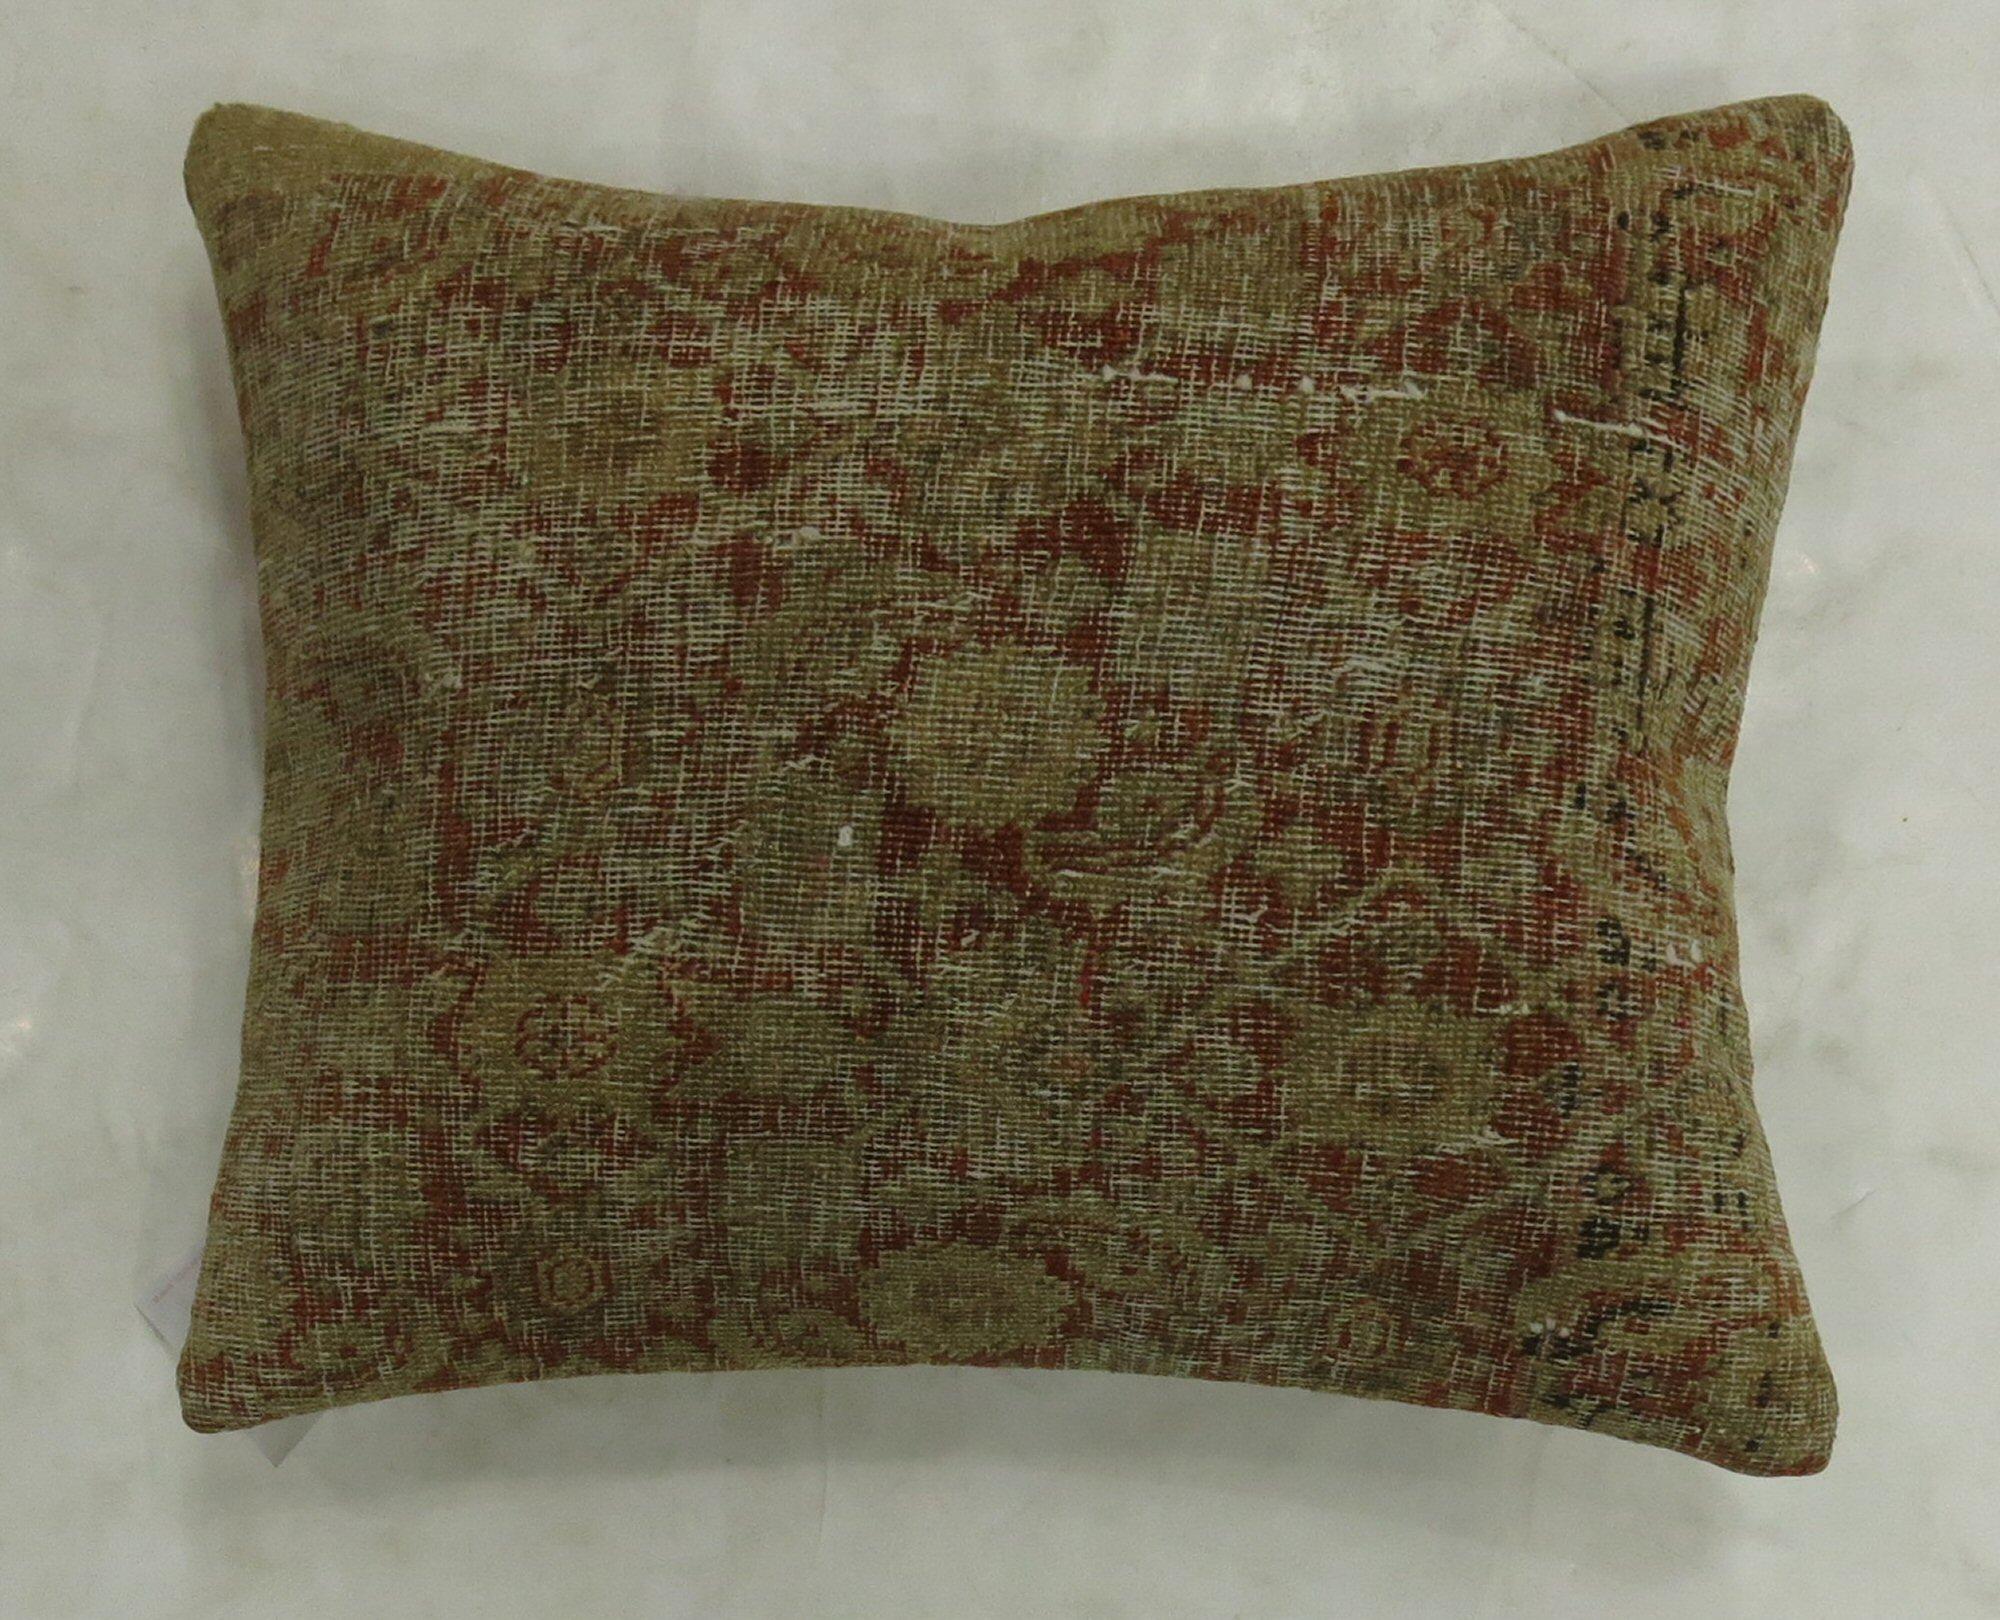 Pillow made from a 19th century fine quality Persian Tabriz rug featuring a Herati design on a rusty red ground. 
Measures: 16